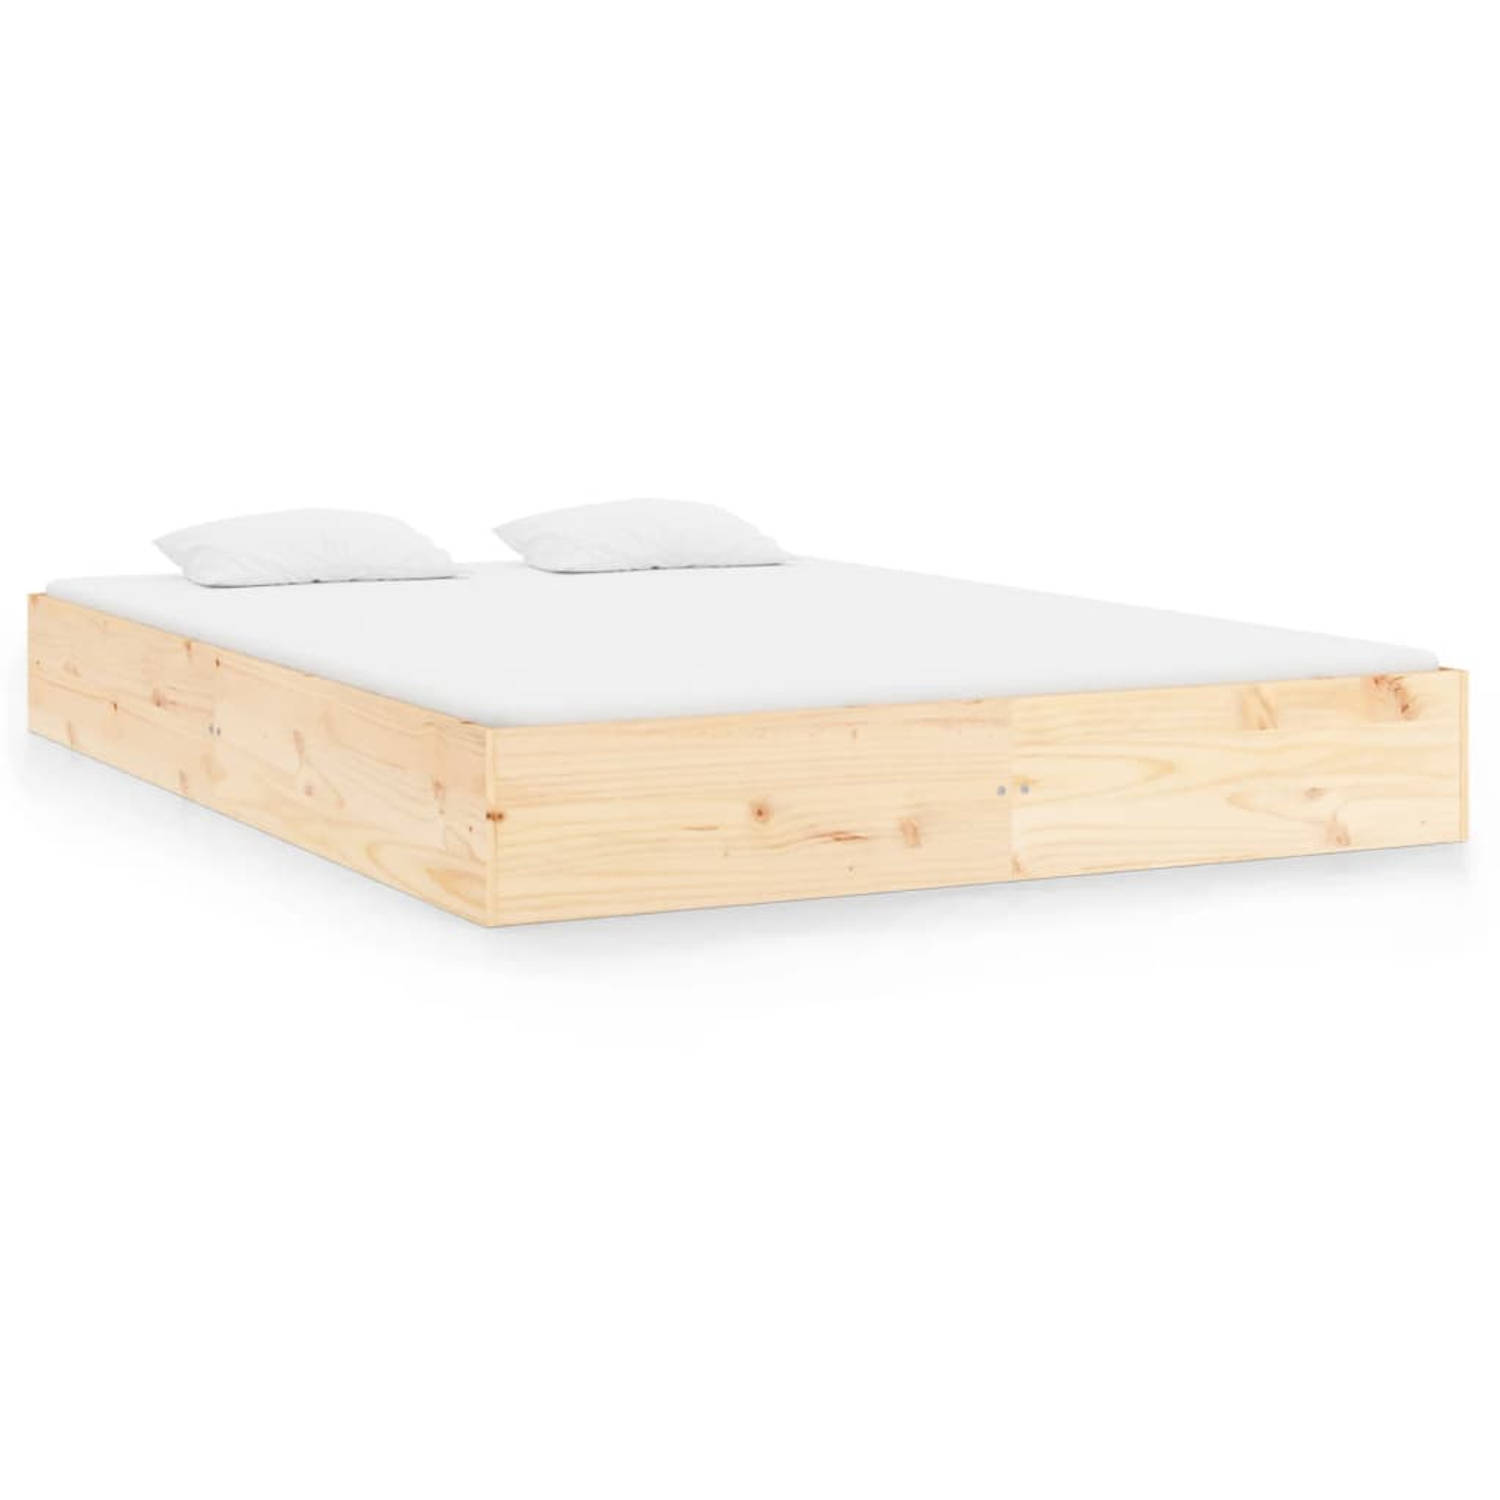 The Living Store Bedframe massief hout 140x200 cm - Bed